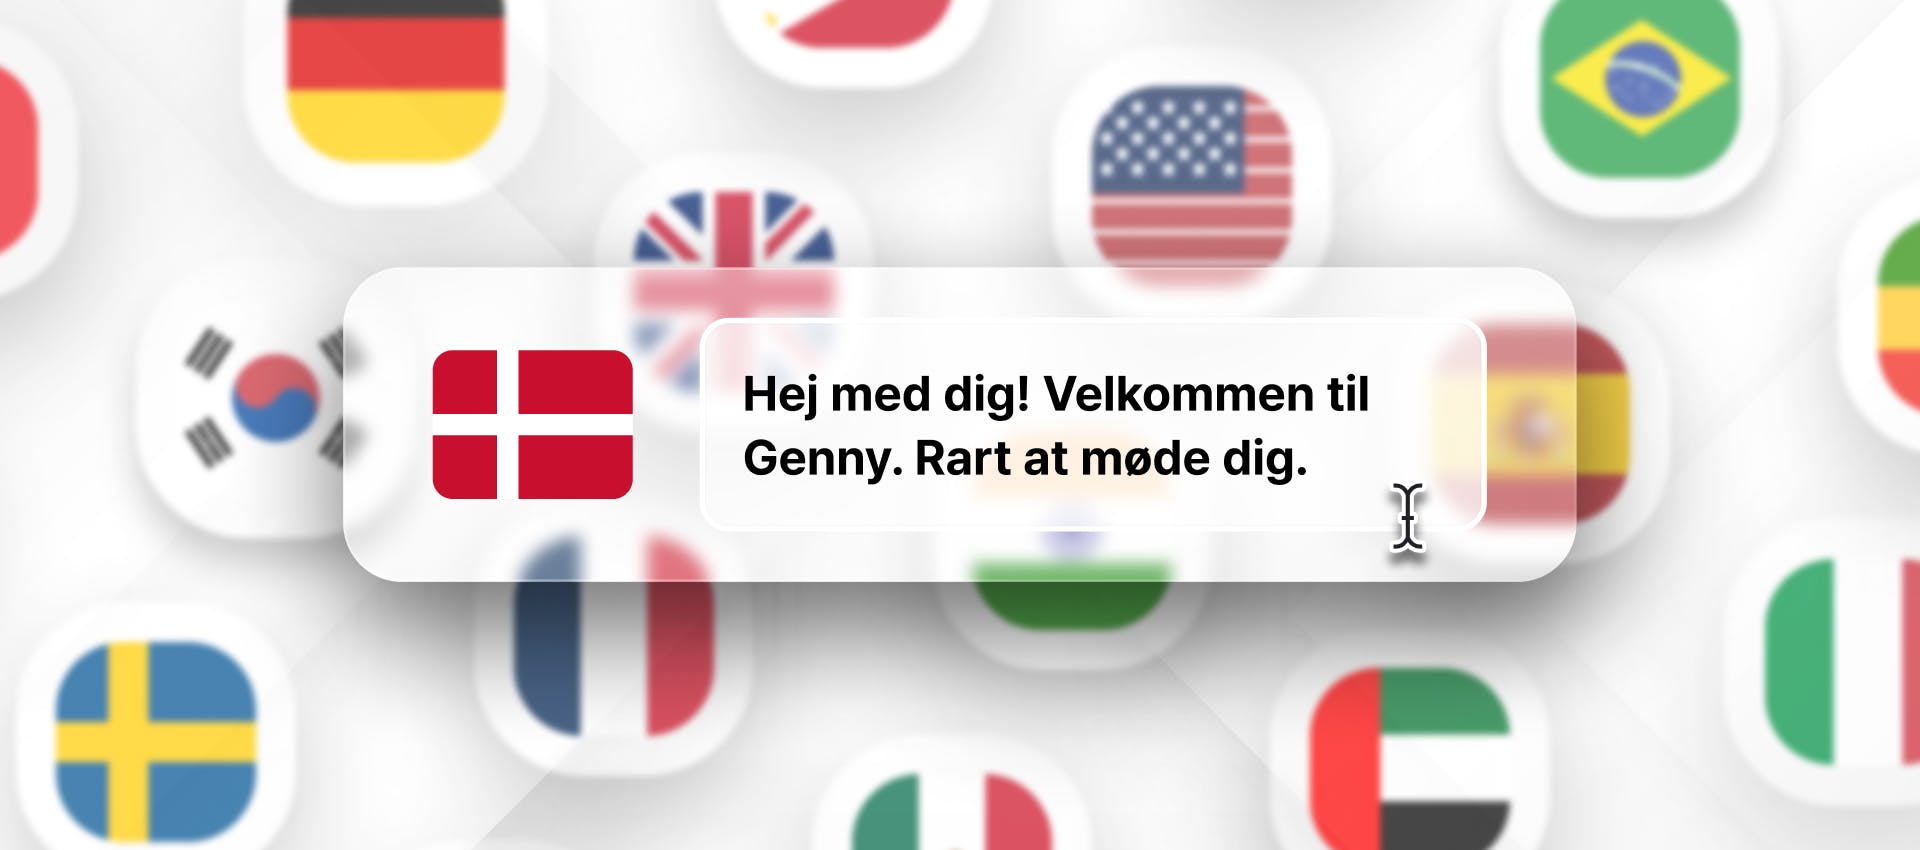 Danish phrase for Danish TTS generation with different flags in the background